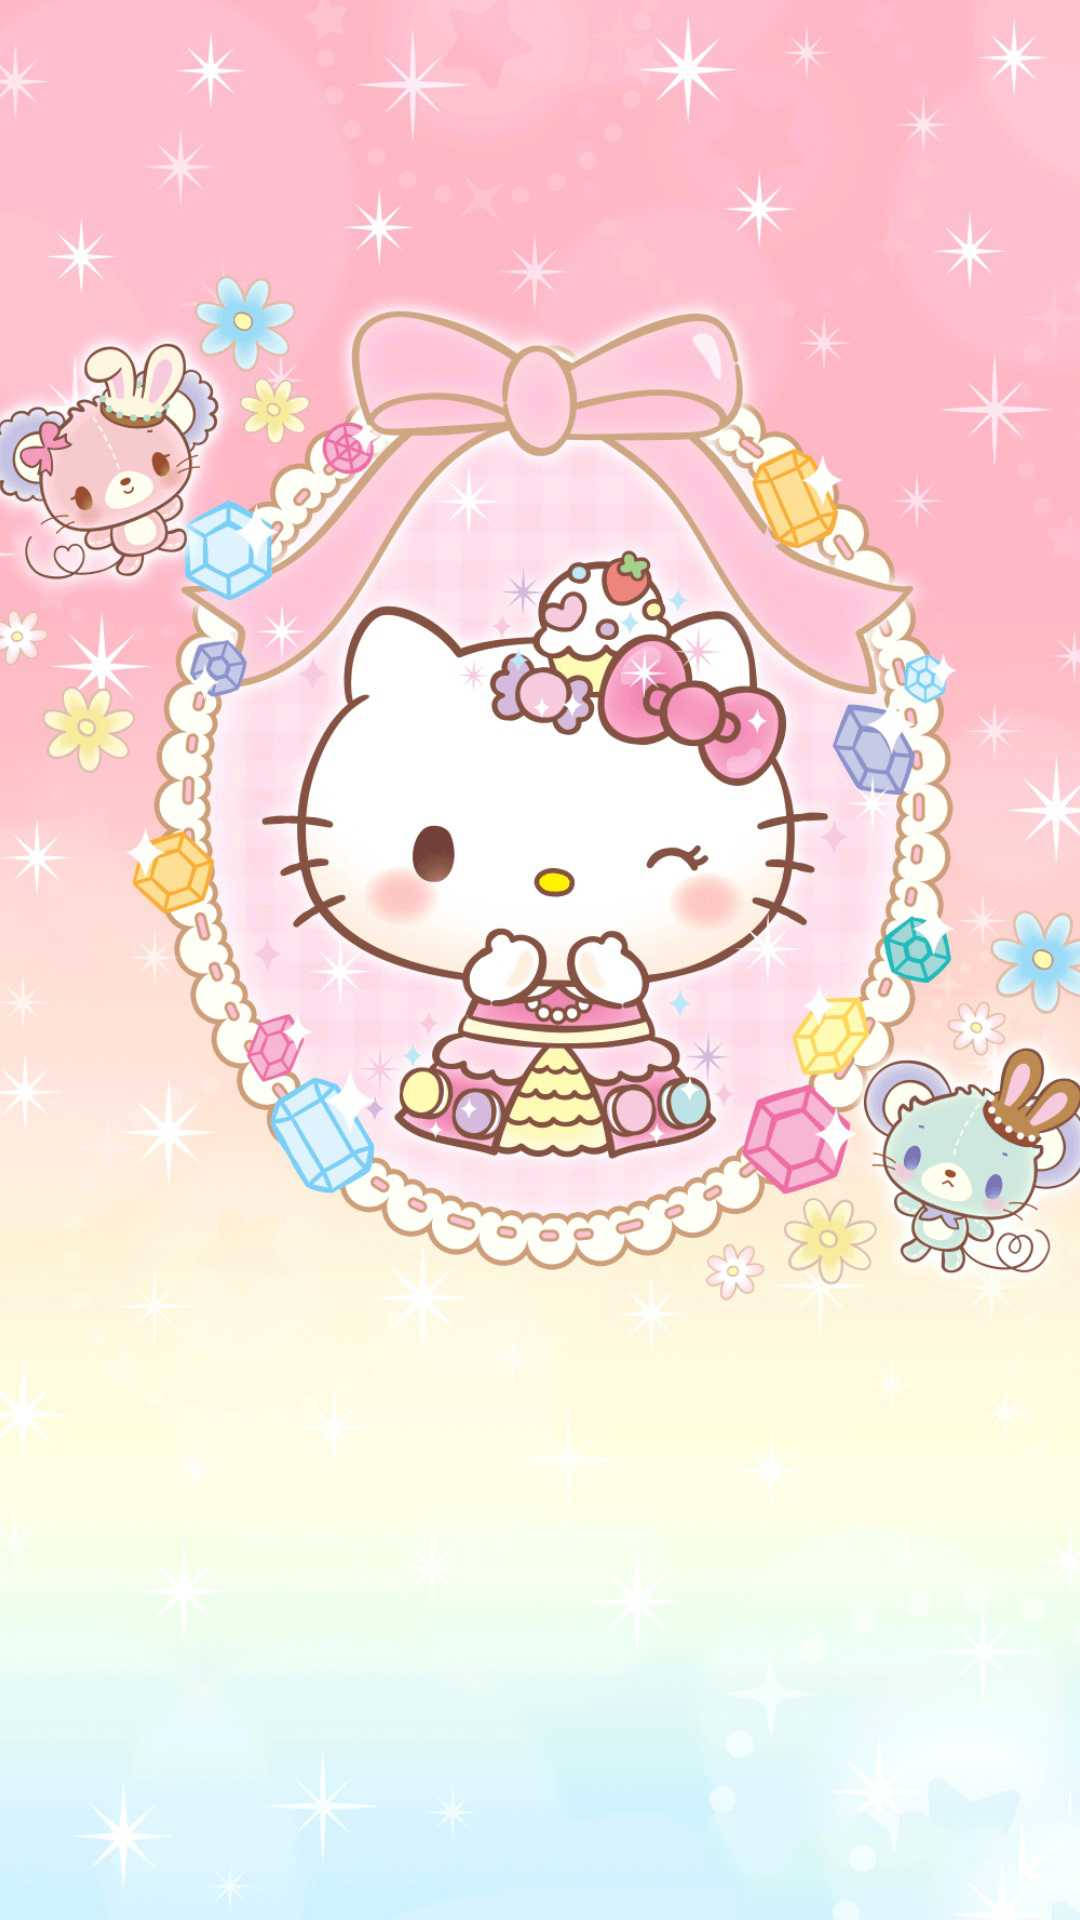 Explore the World of Cute Sanrio Characters! Wallpaper